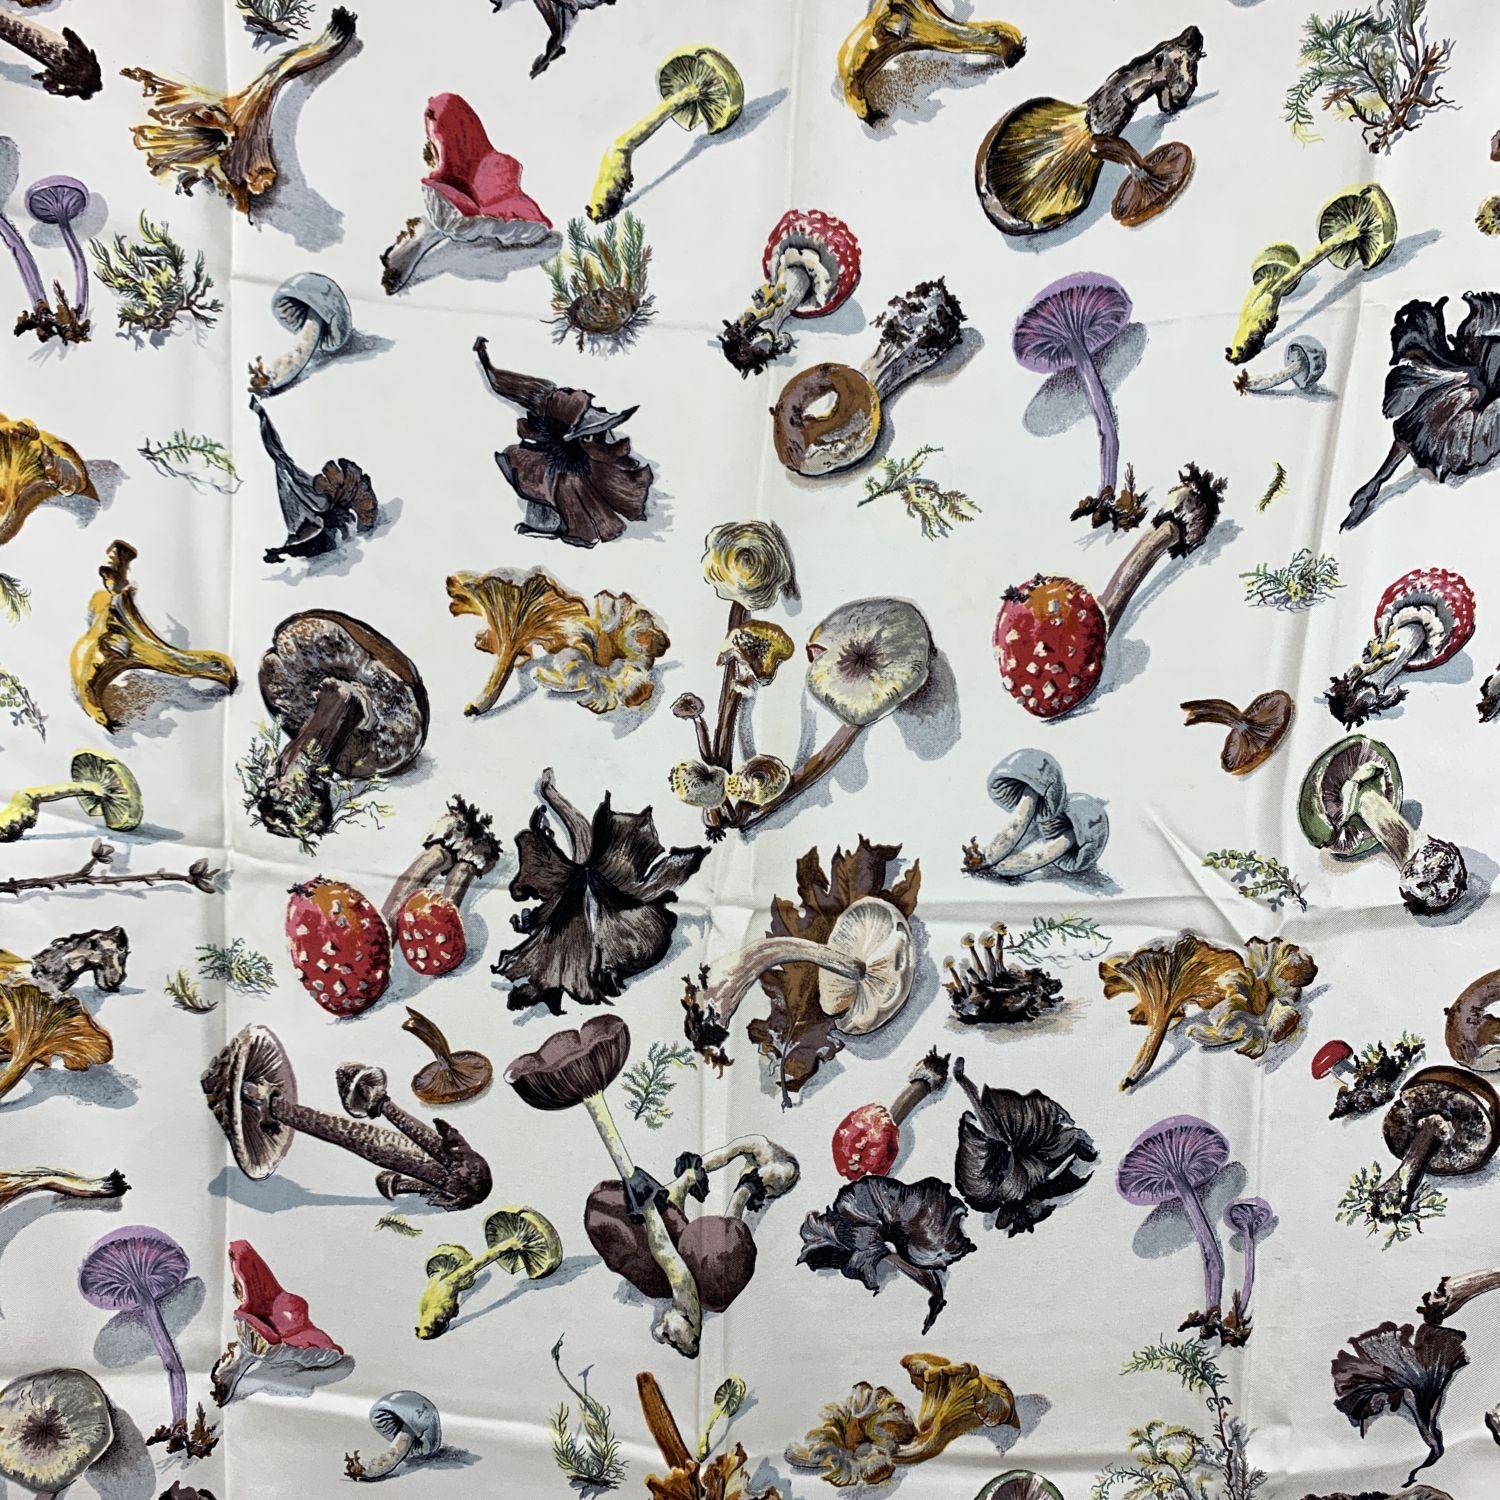 HERMES silk scarf named 'Champignons', designed by Francoise de la Perriere and Anne Gavarni and issued the first time in 1959. It features different types of mushrooms. It has re-issued many times, in different colours, formats and variations of